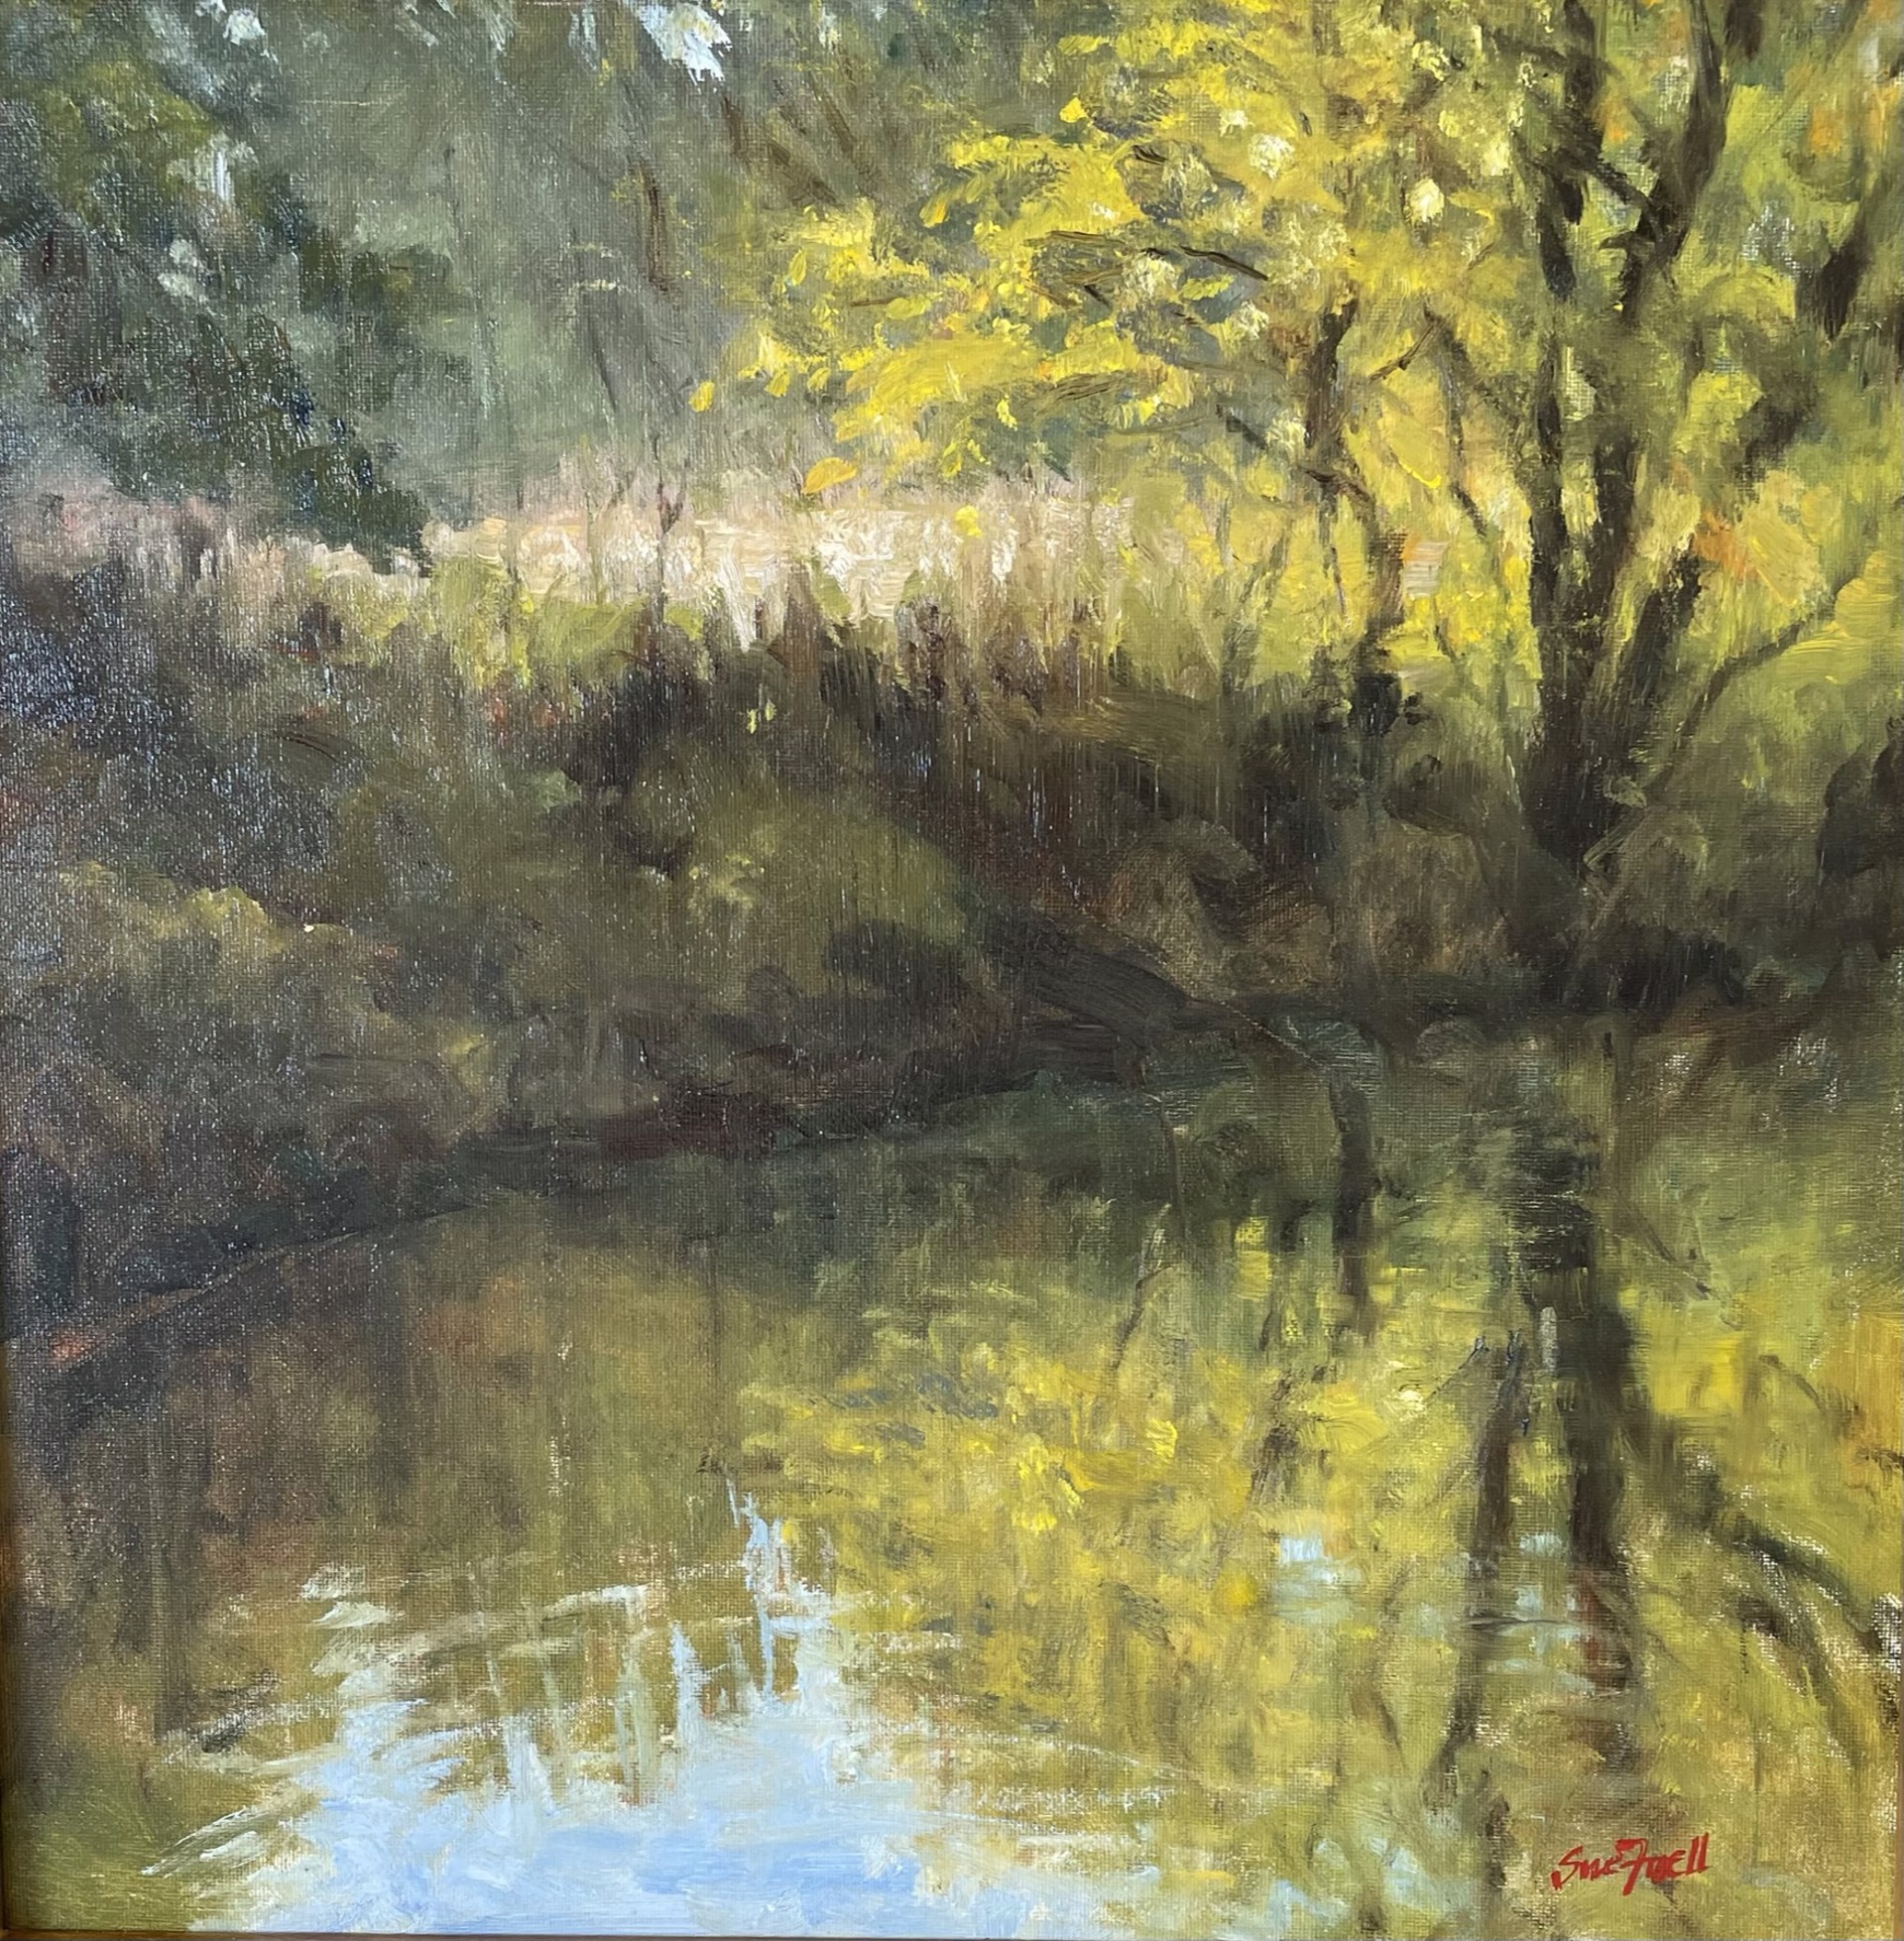 October Reflections by Sue Foell